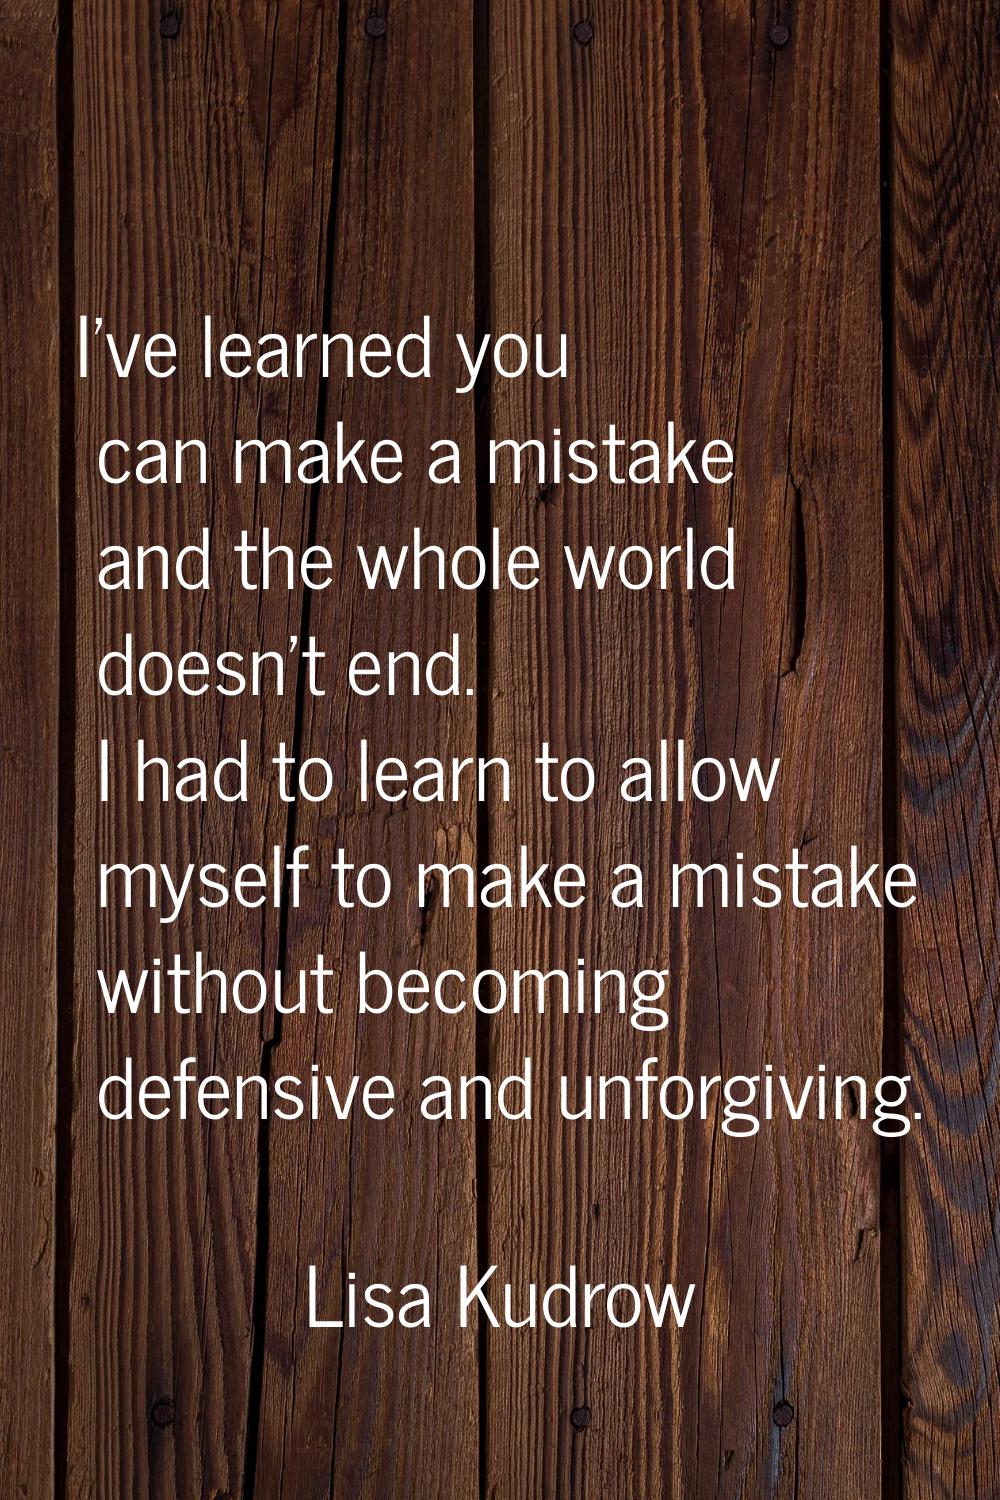 I've learned you can make a mistake and the whole world doesn't end. I had to learn to allow myself